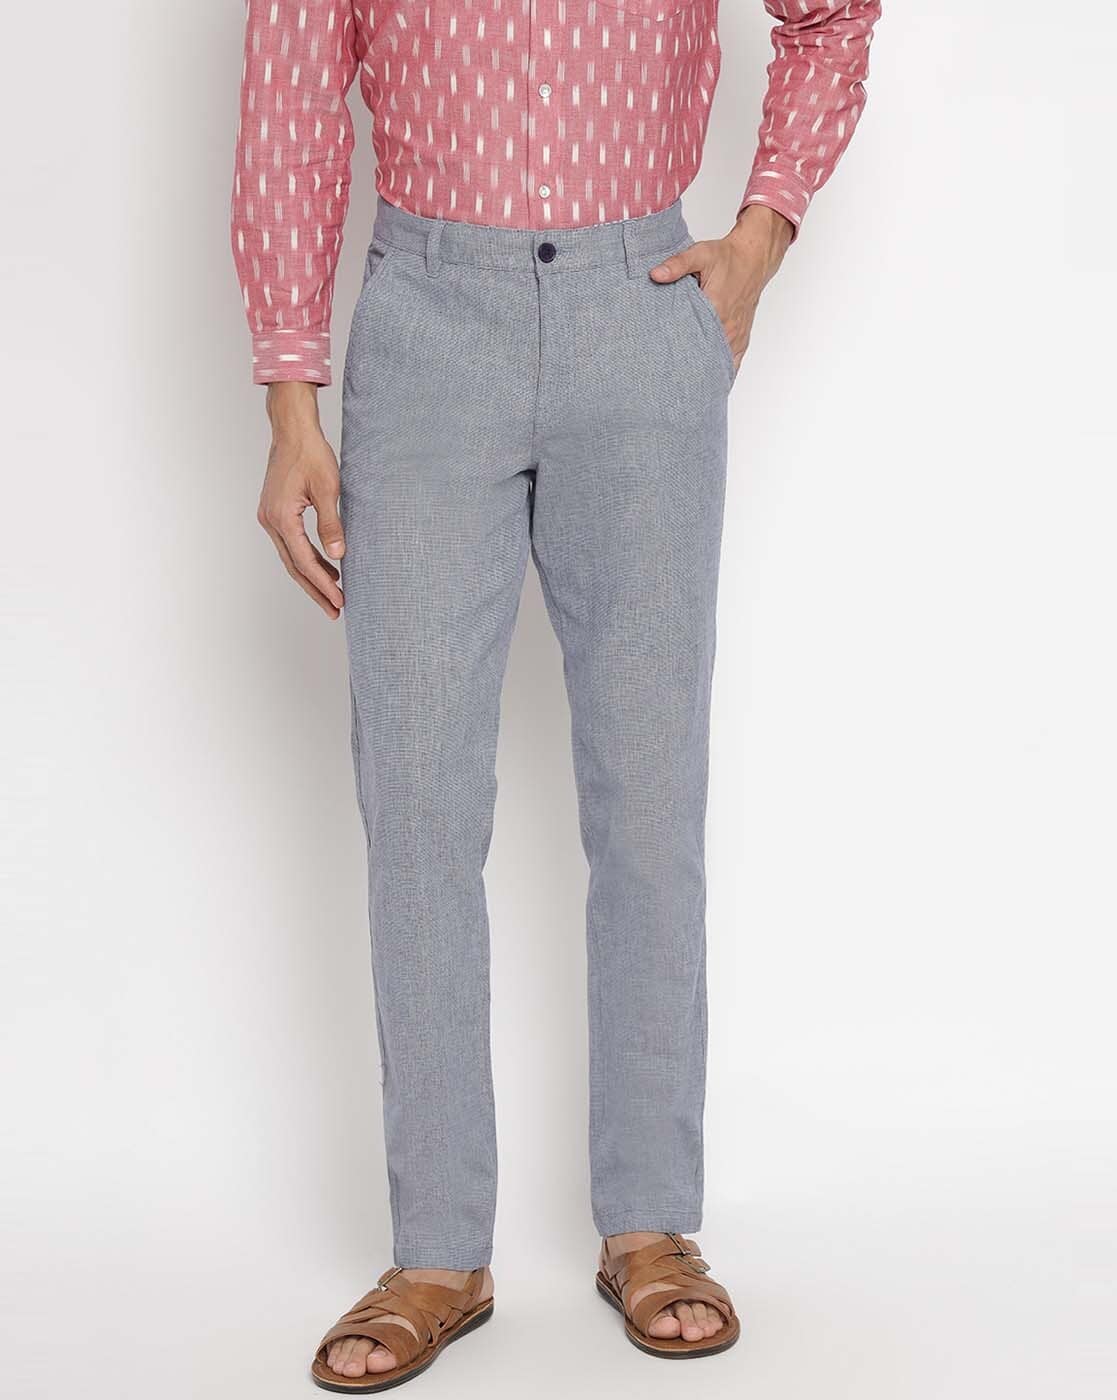 Buy Cotton Printed Casual Tapered Pant for Women Online at Fabindia   10674116